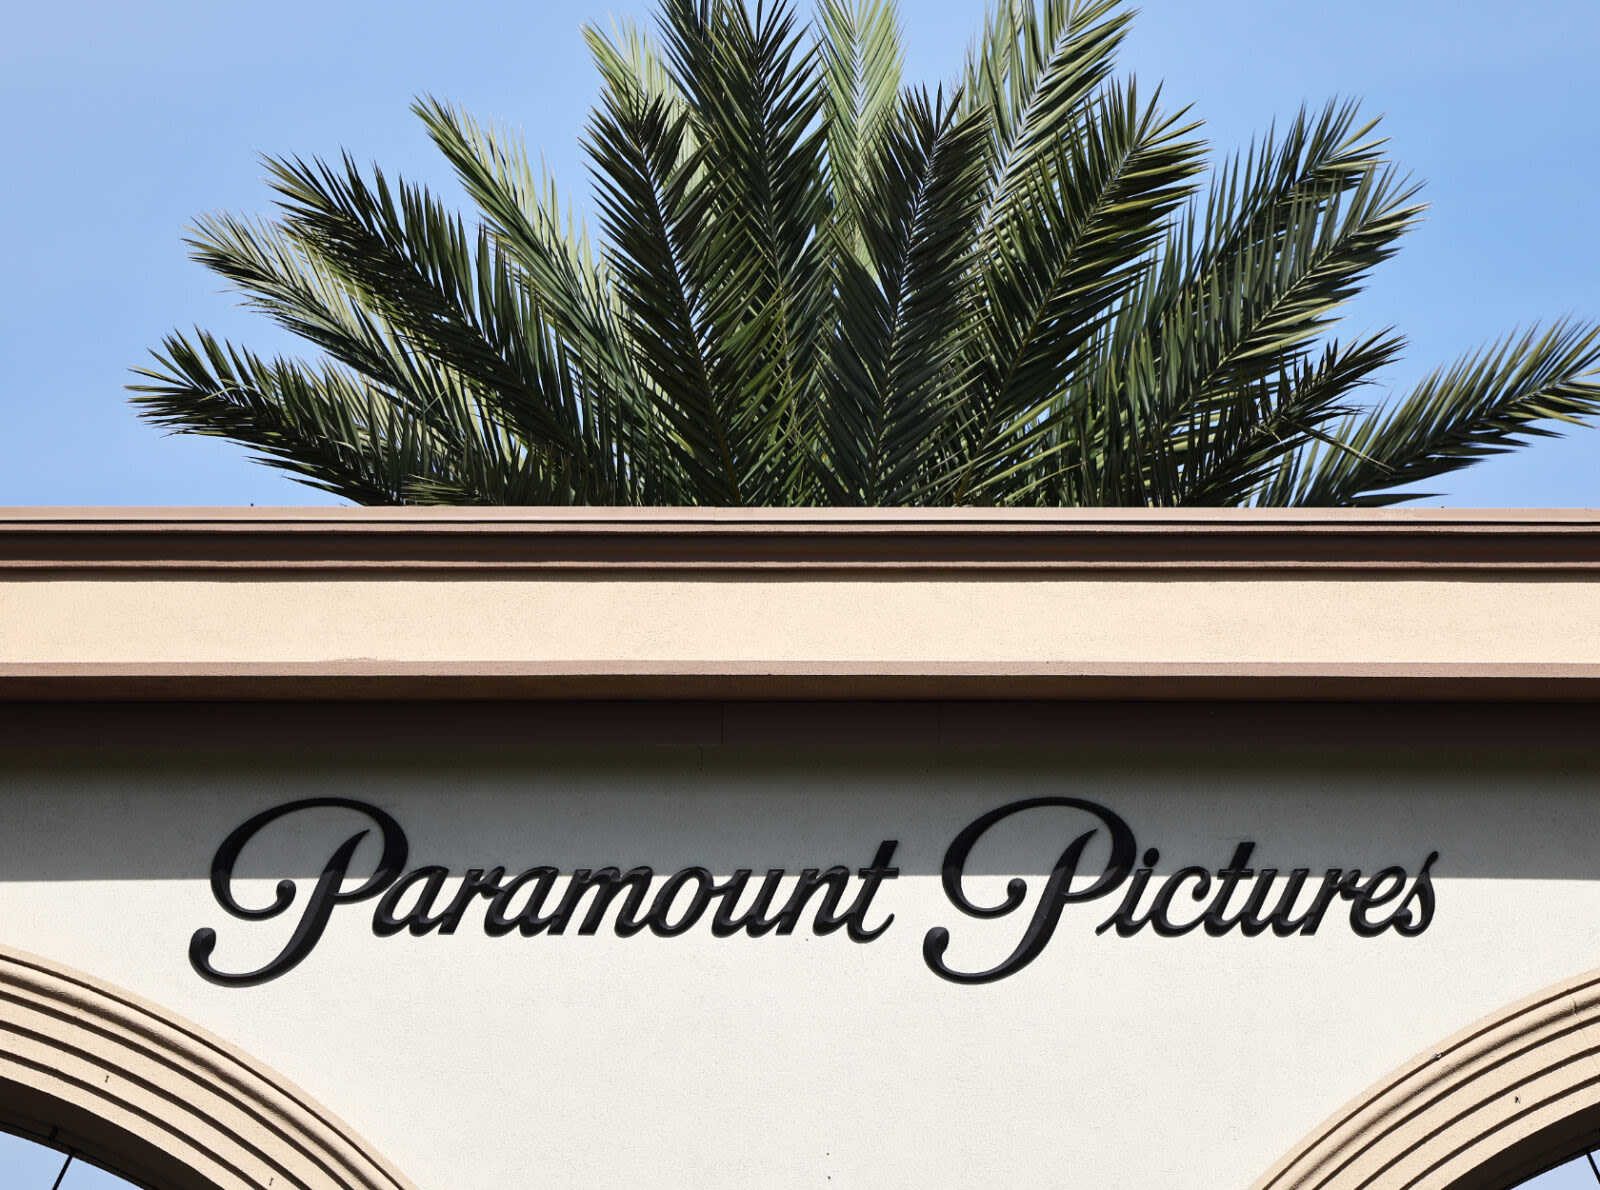 The curious case of Paramount Pictures